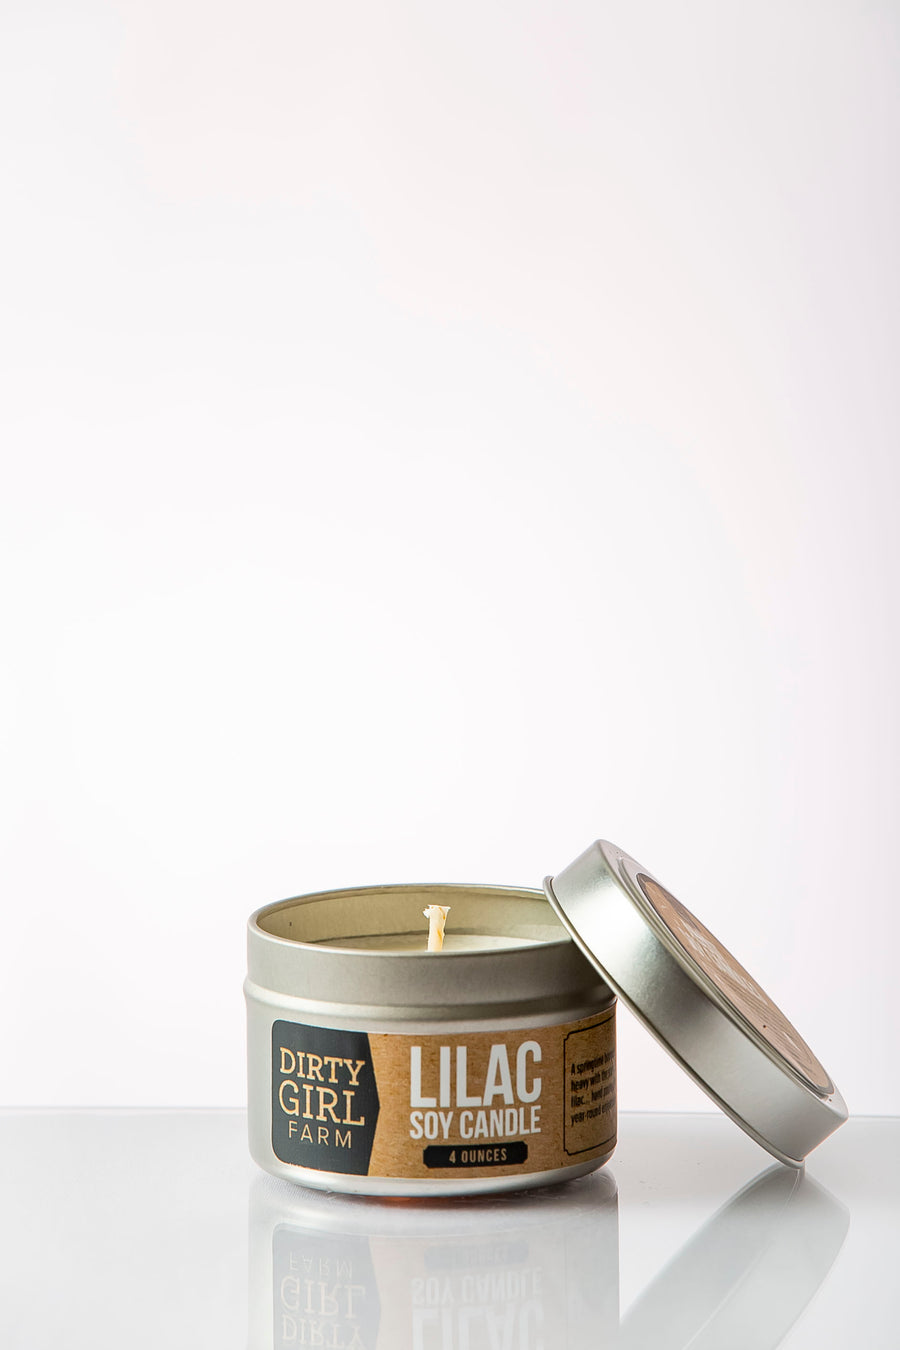 Dirty Girl Farm Lilac Soy Candle